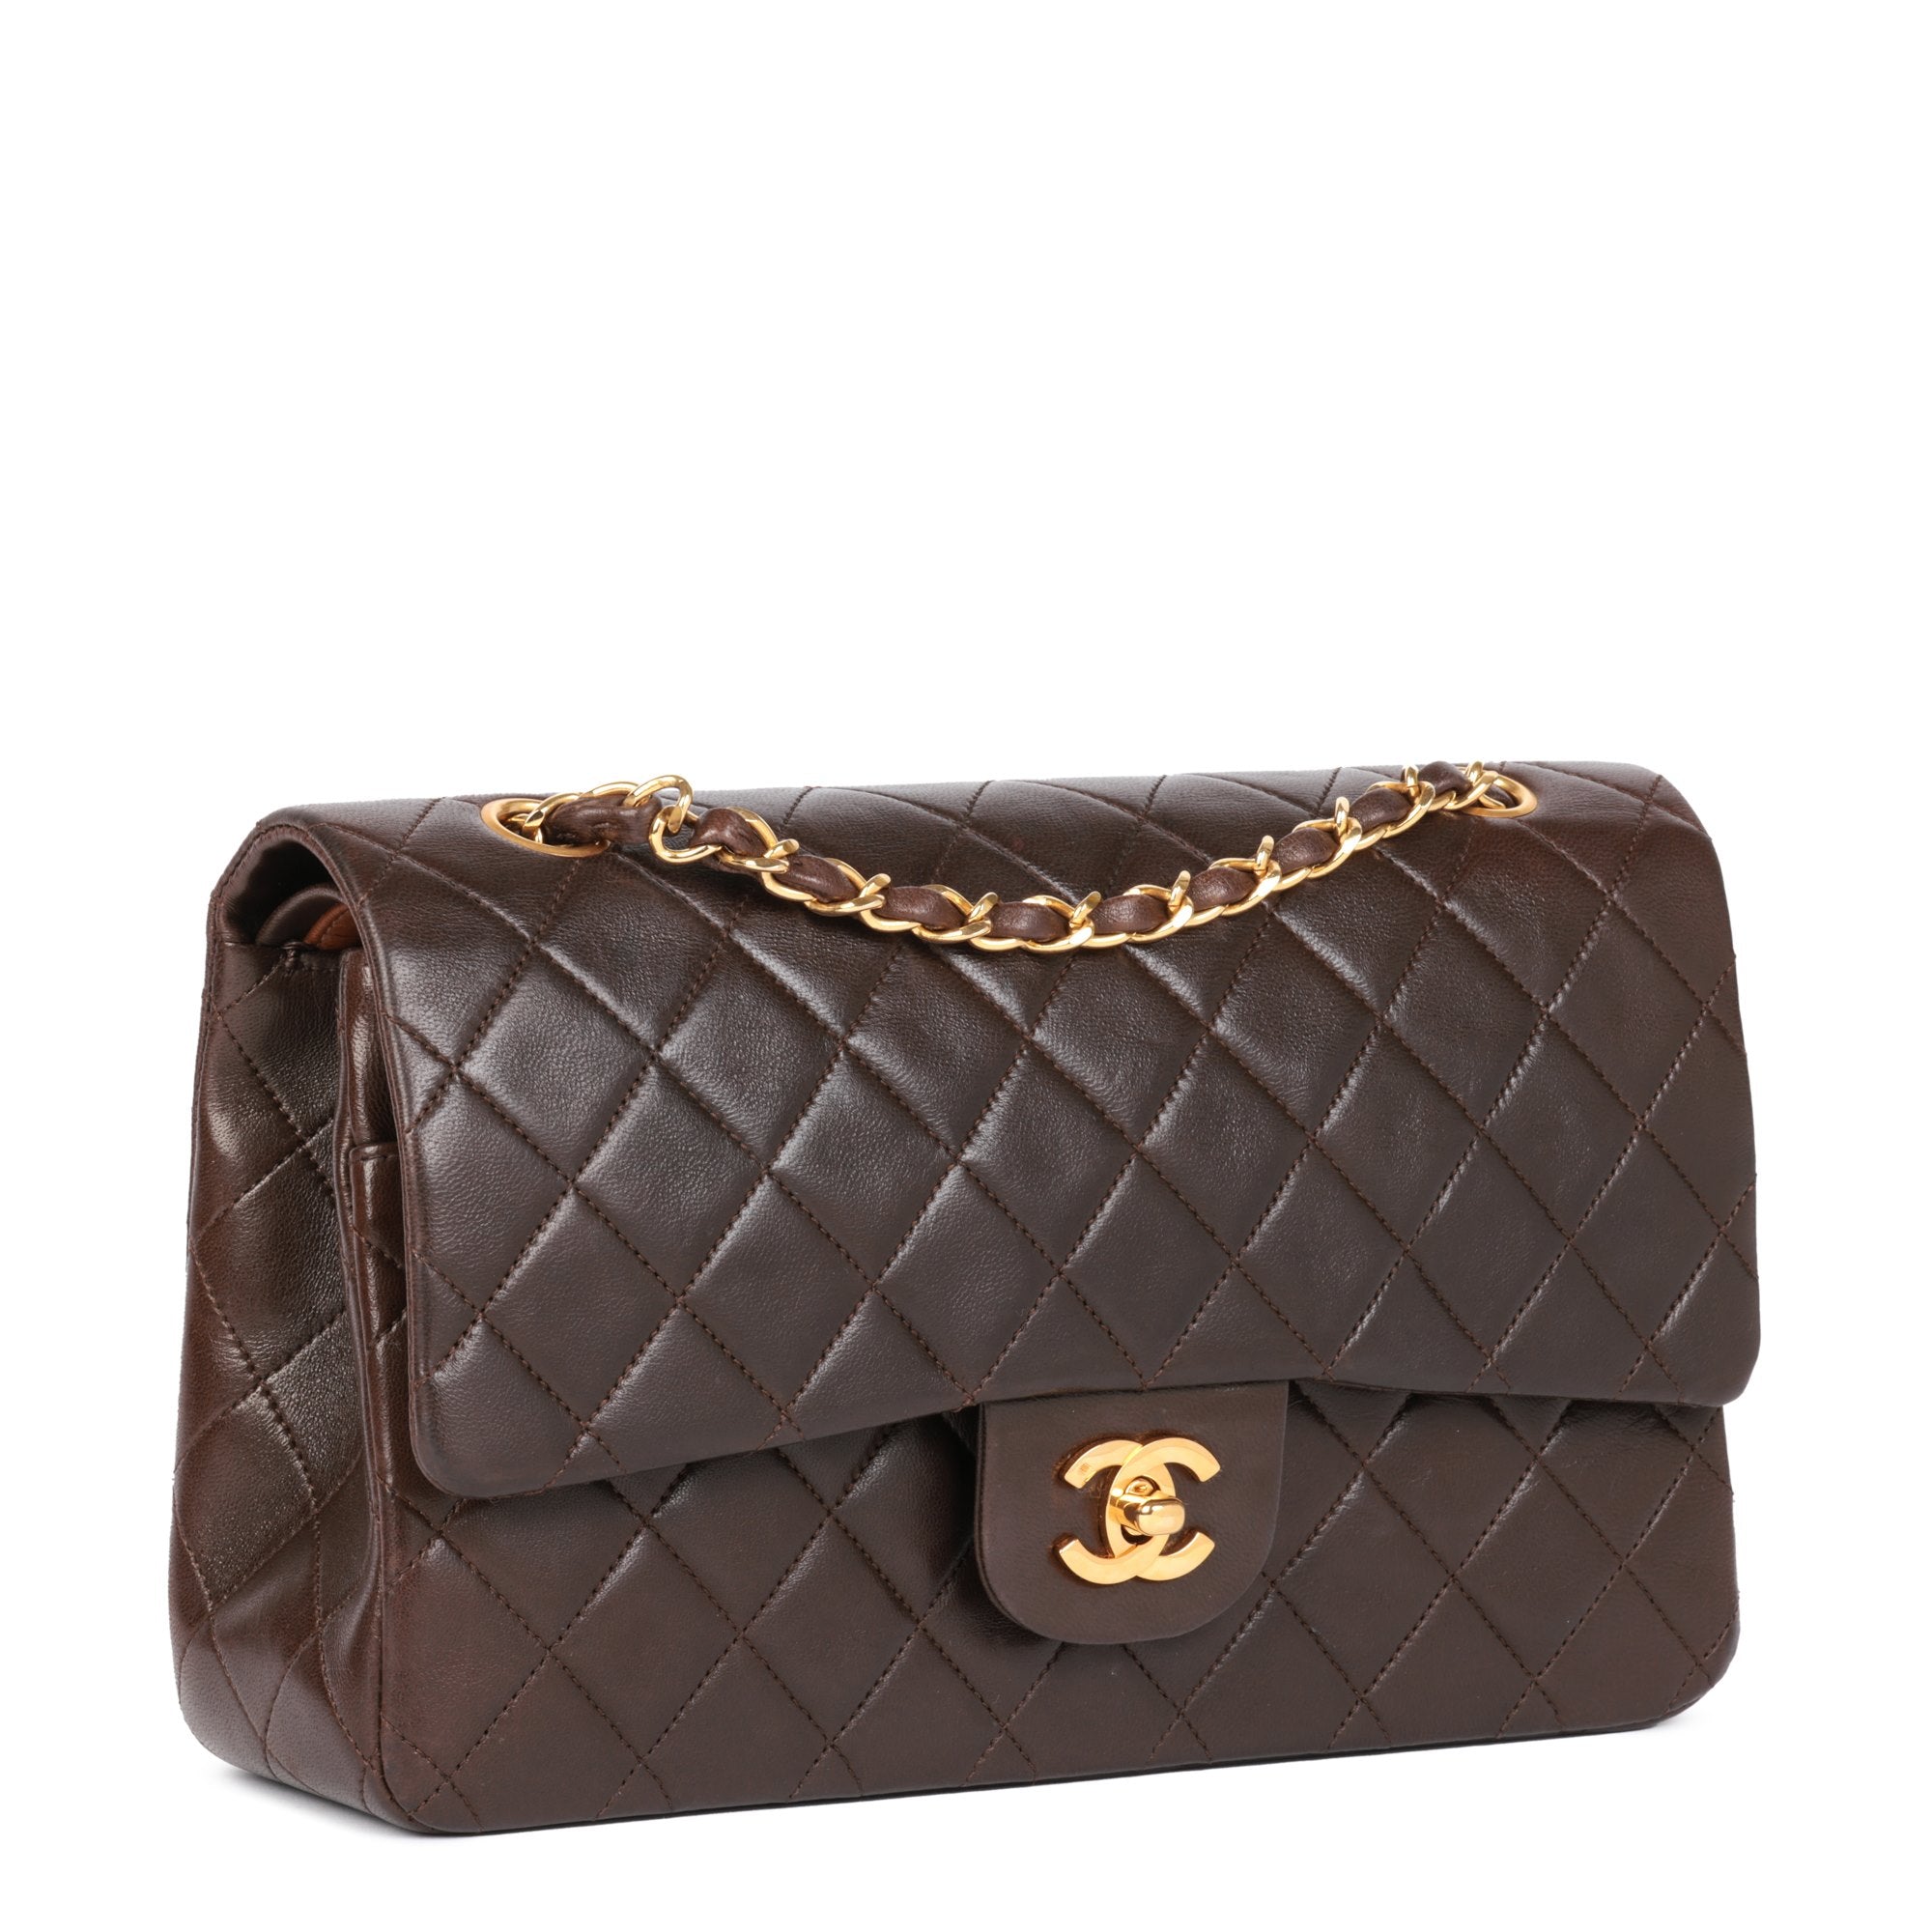 Chanel Bags | Luxury Resale | myGemma – Page 2